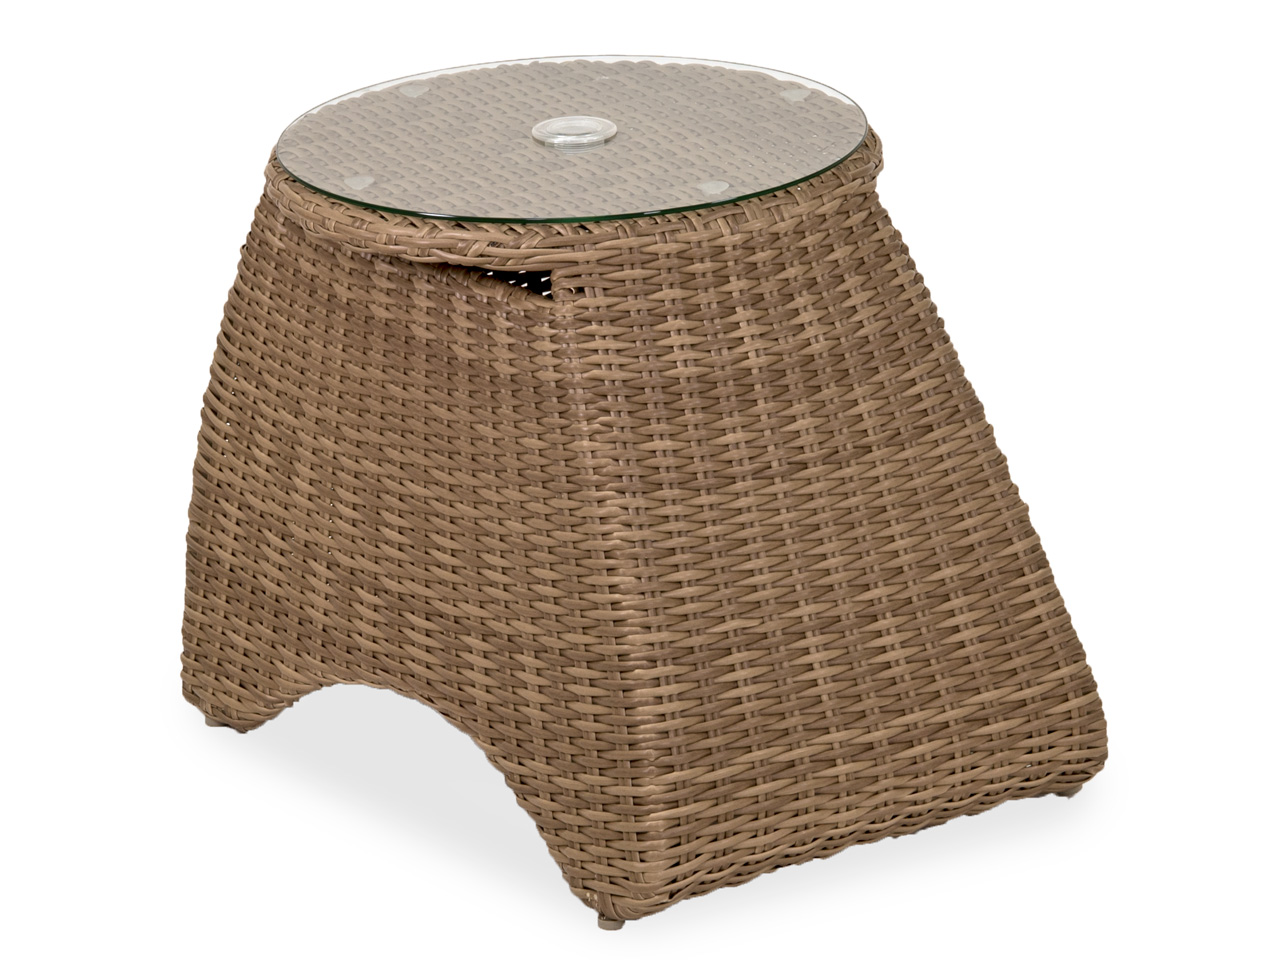 biscayne round aluminum woven resin wicker side table chair king wickr outdoor brown pottery barn furniture granite top coffee night lamp luxury living room glass home office